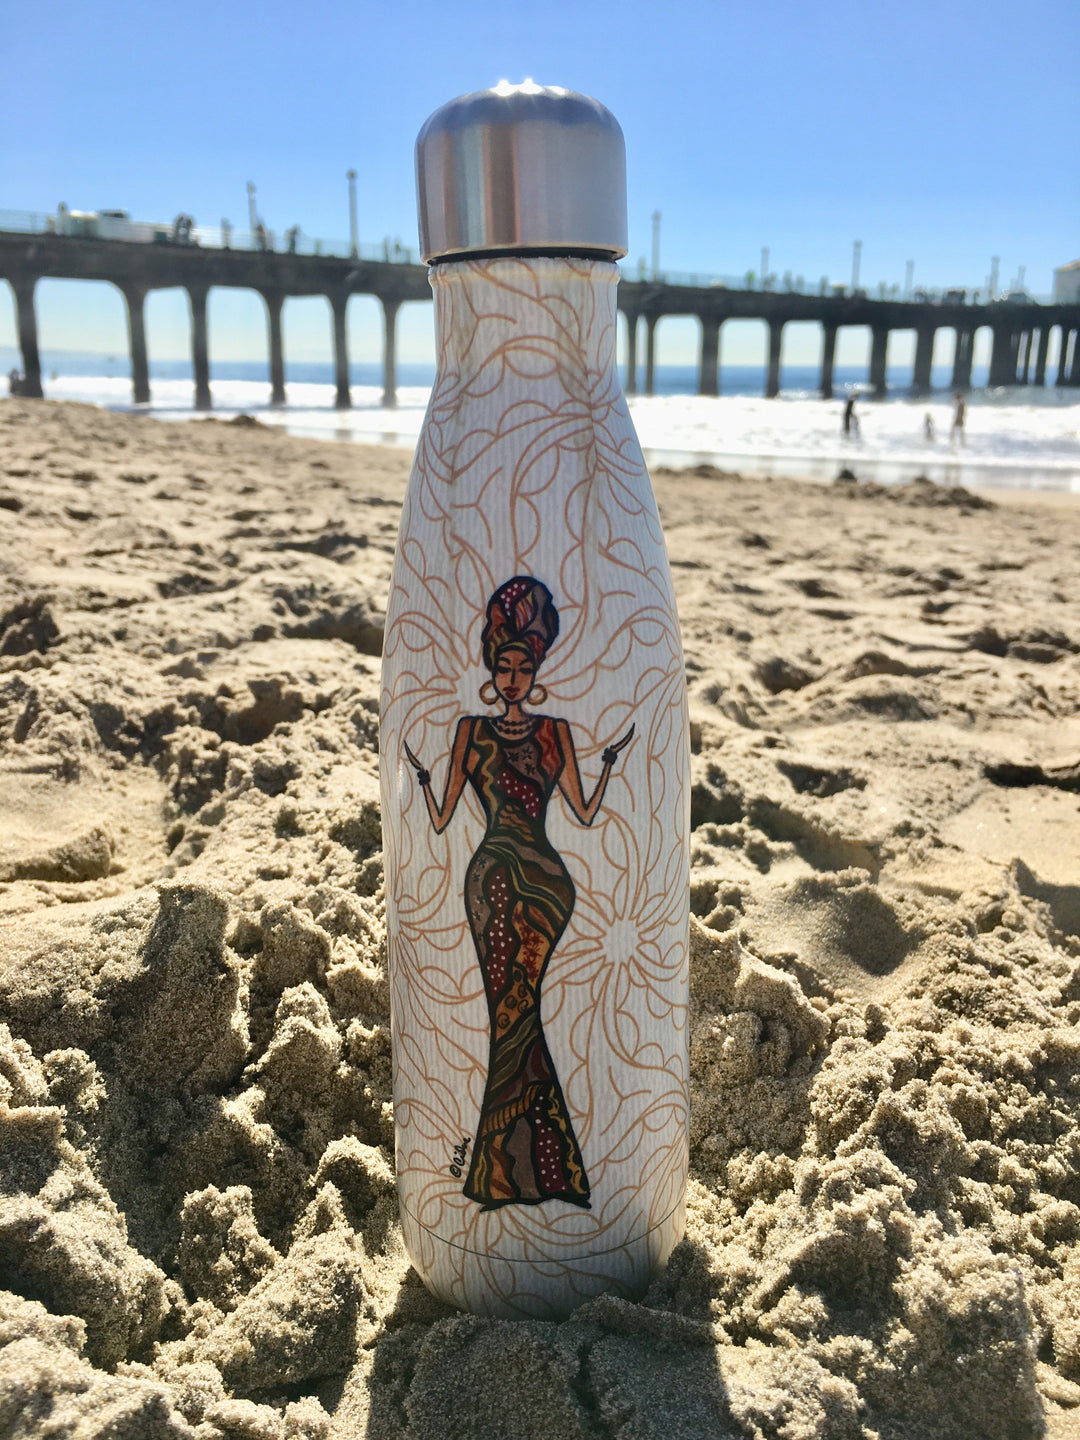 Beautifully Blessed: African American Stainless Steel Water Bottle by Cidne Wallace